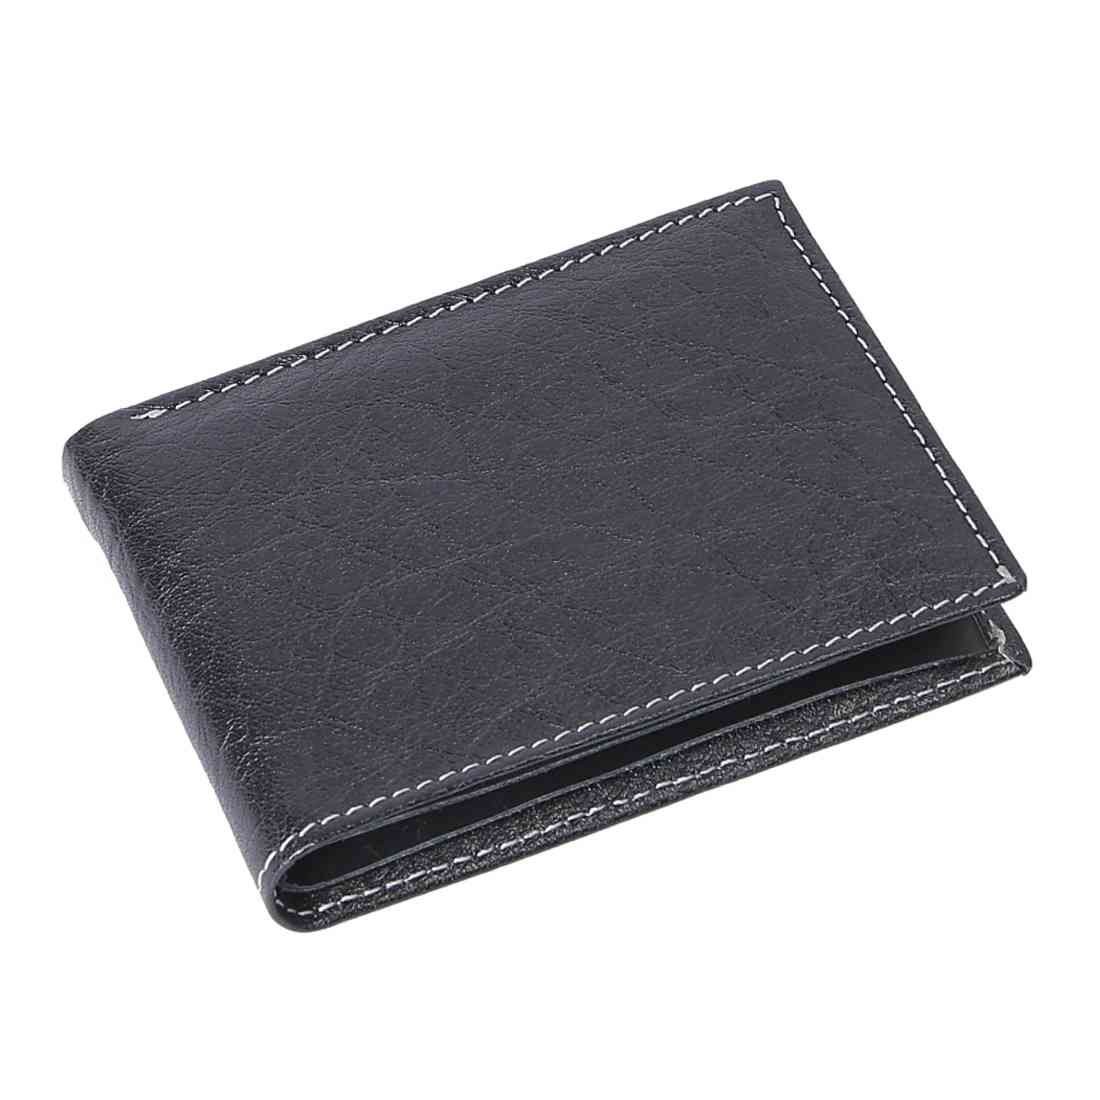 OHM Leather New York Wallet in Black/ Tan